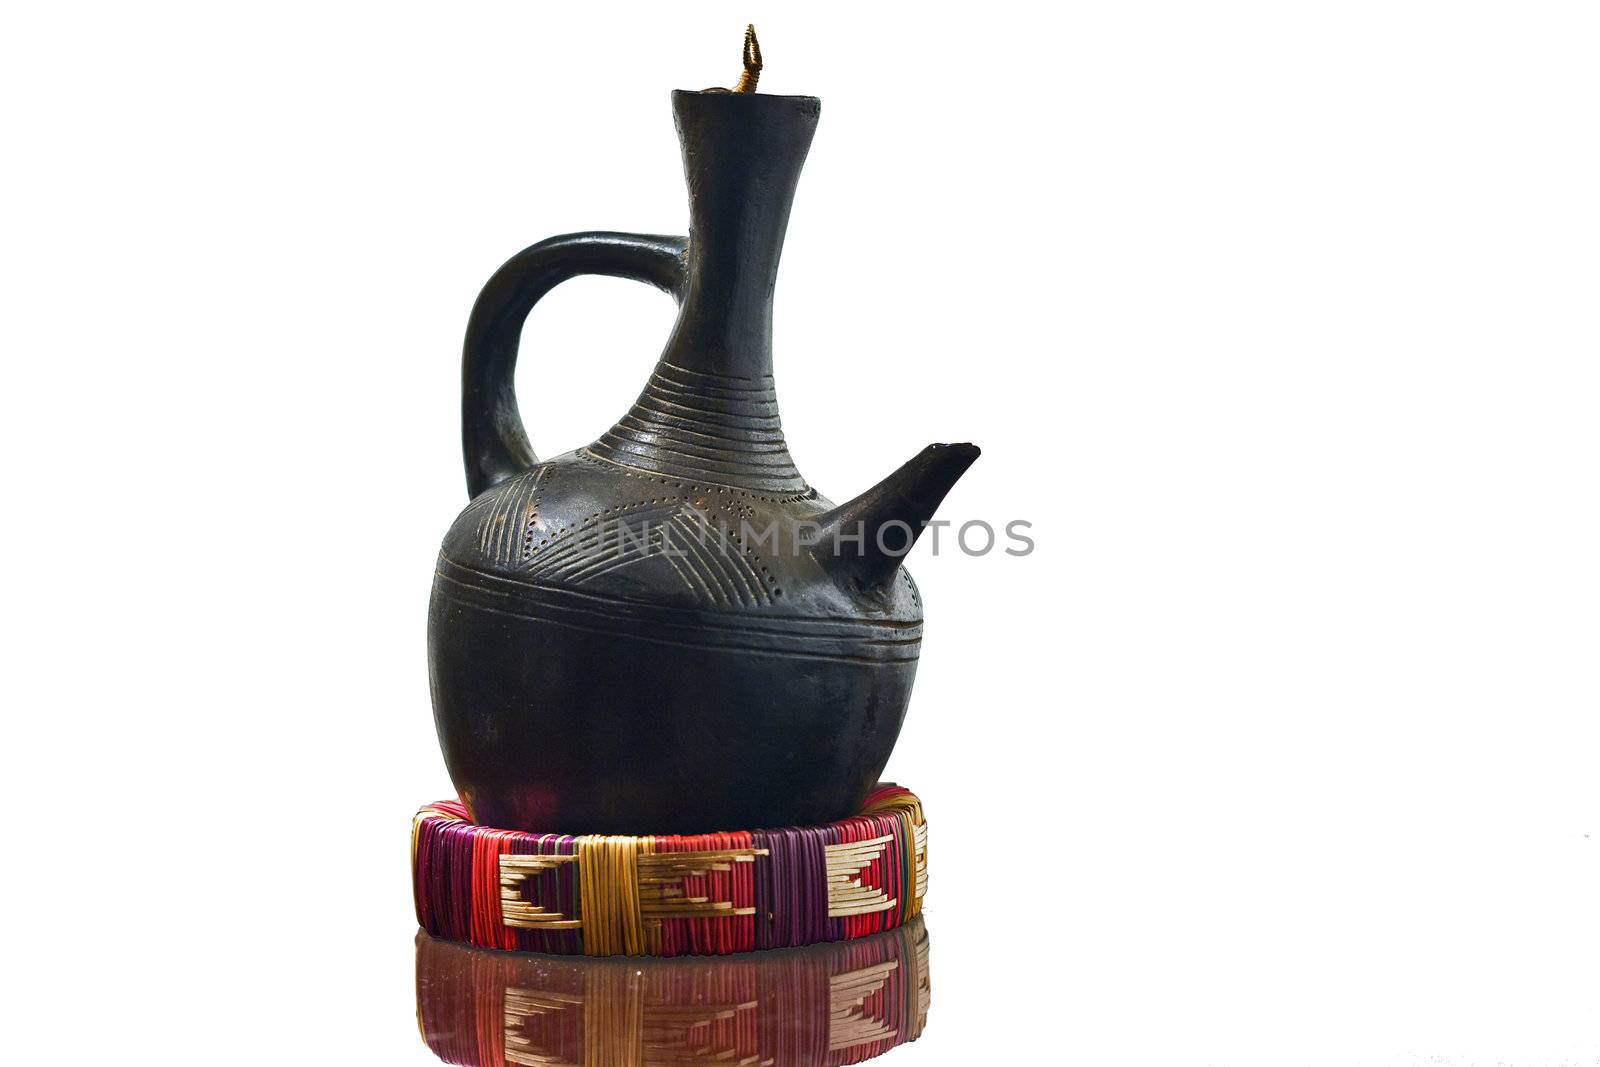 Traditional Ethiopian coffee pot made out of clay